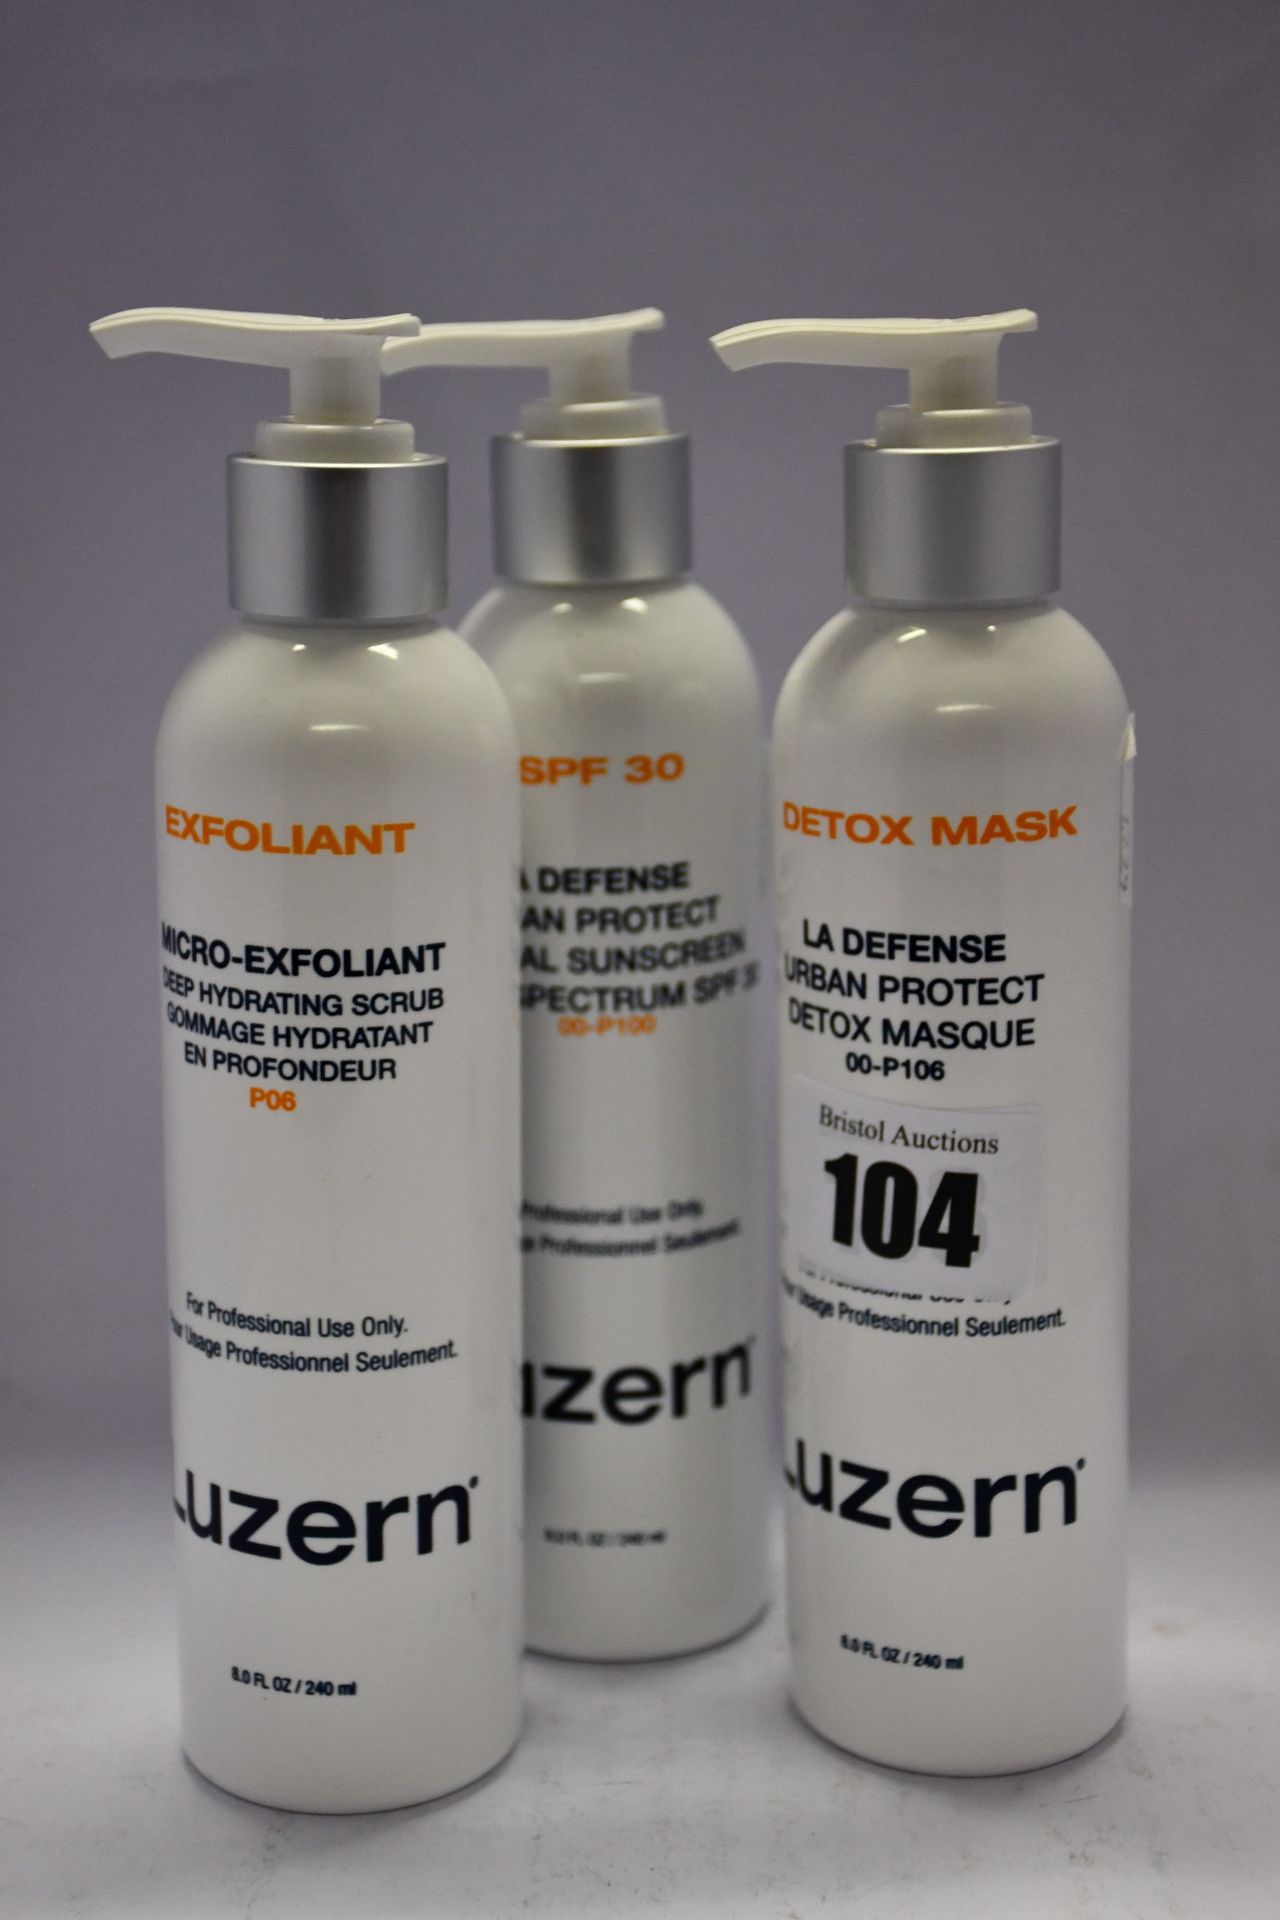 Three Luzern products to include SPF30, Detox Masks and Exfoliant Scrub.